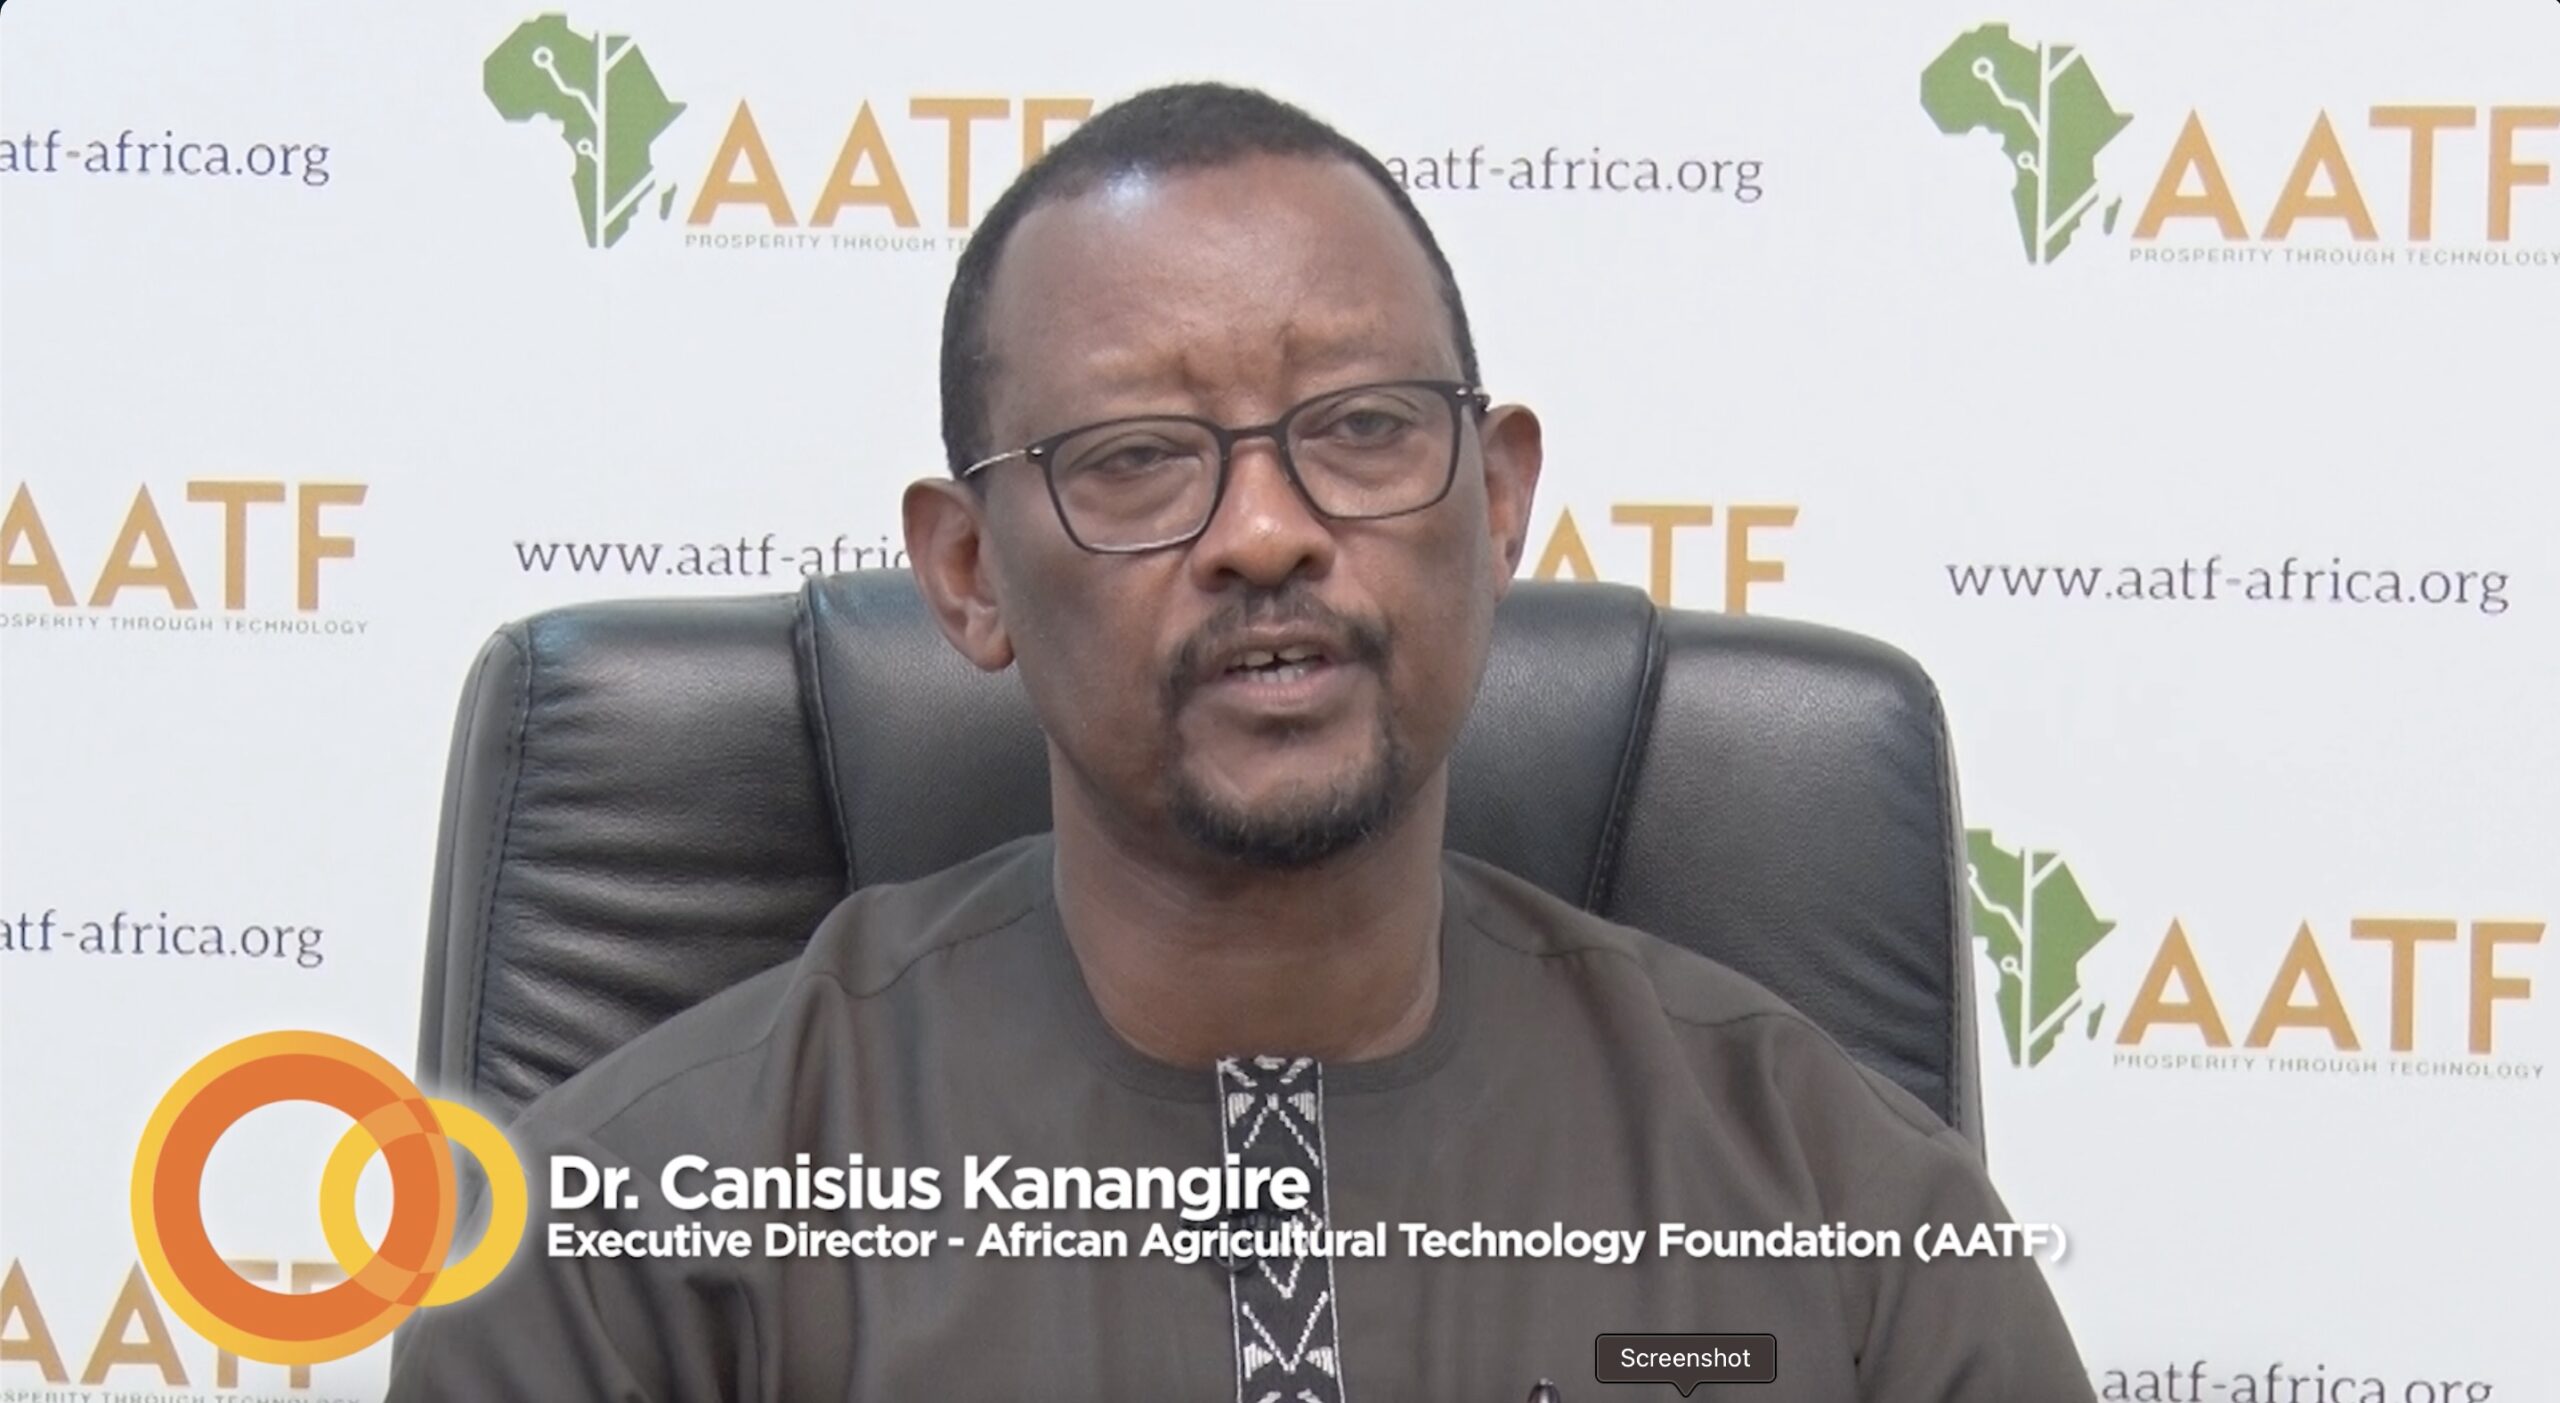 AATF Executive Director speaking on joint winning of 2022 food security prize